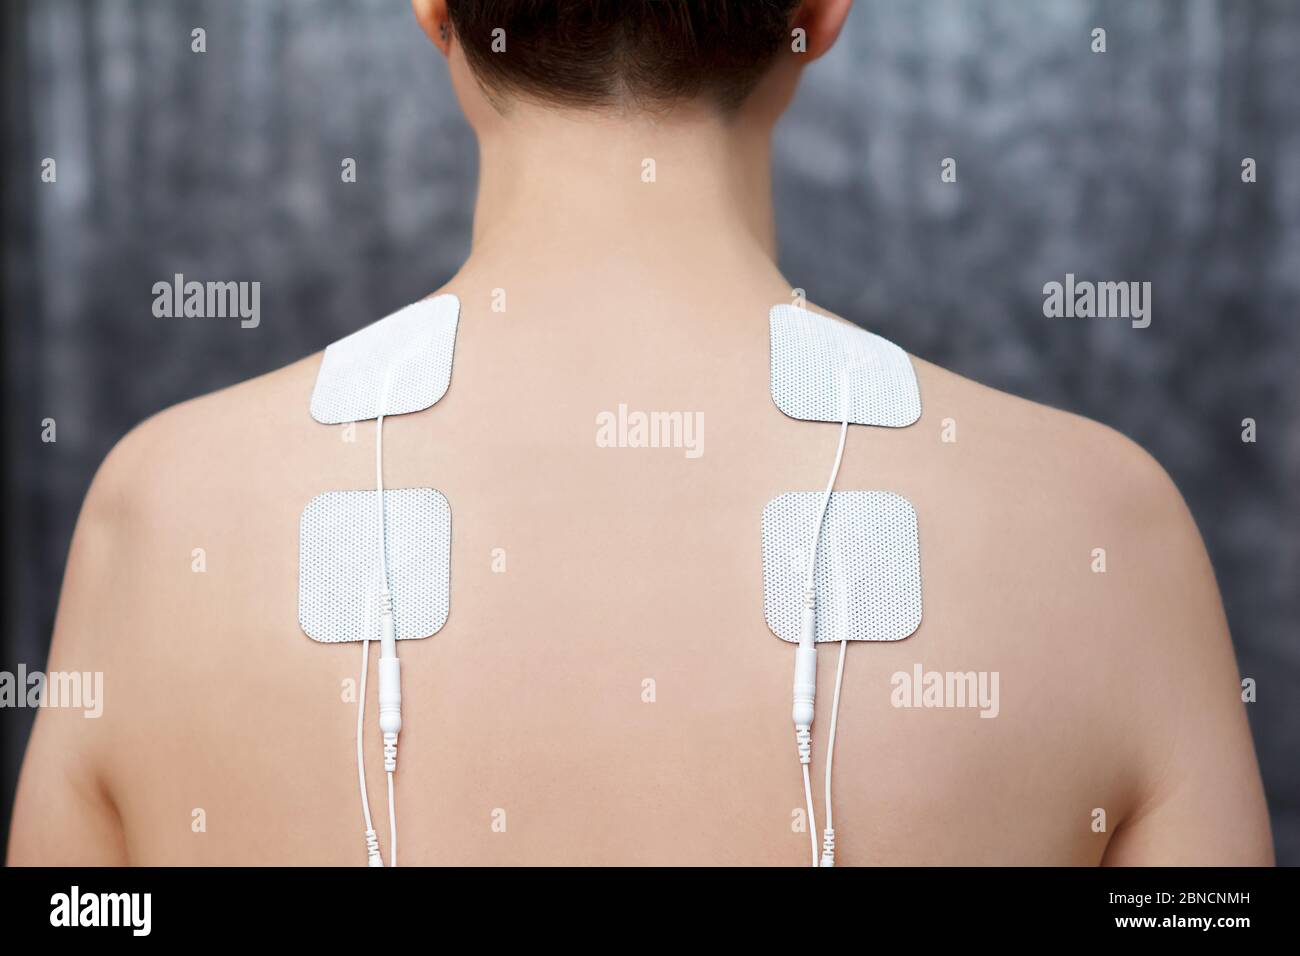 TENS therapy in fibromyalgia treatment - electrodes placed on female patient's shoulders. Stock Photo